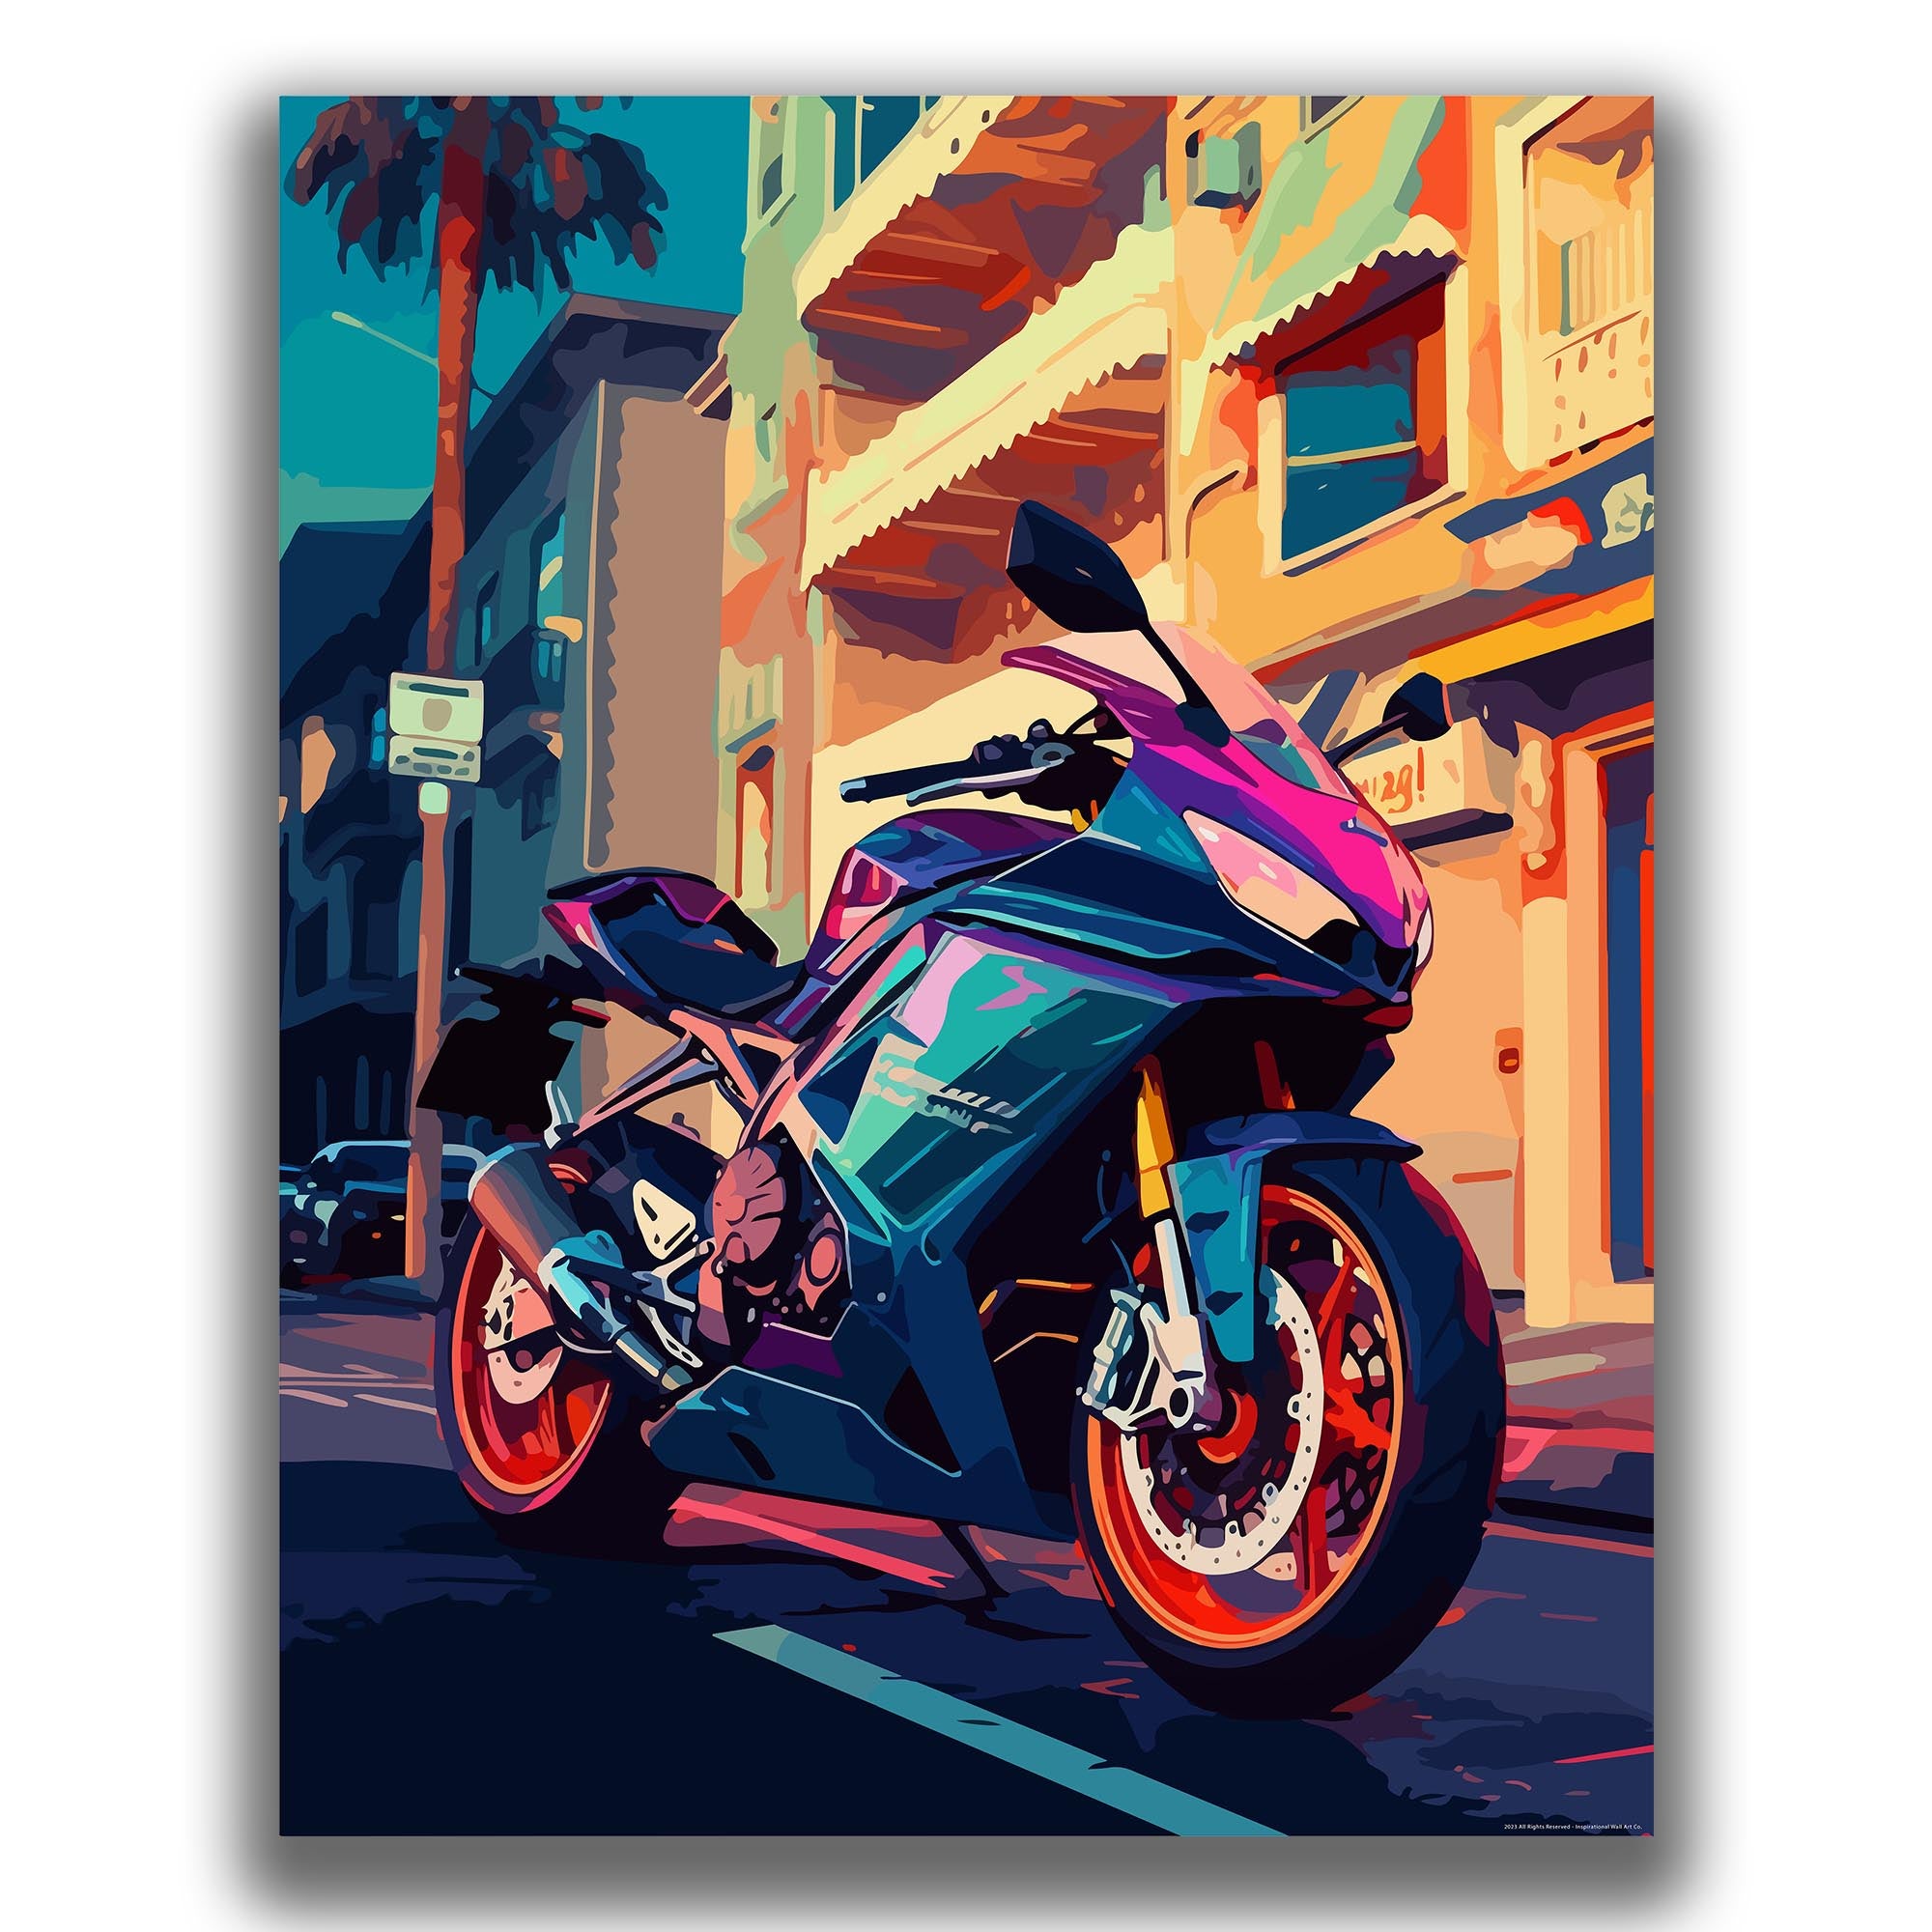 Dapper - Motorcycle Poster